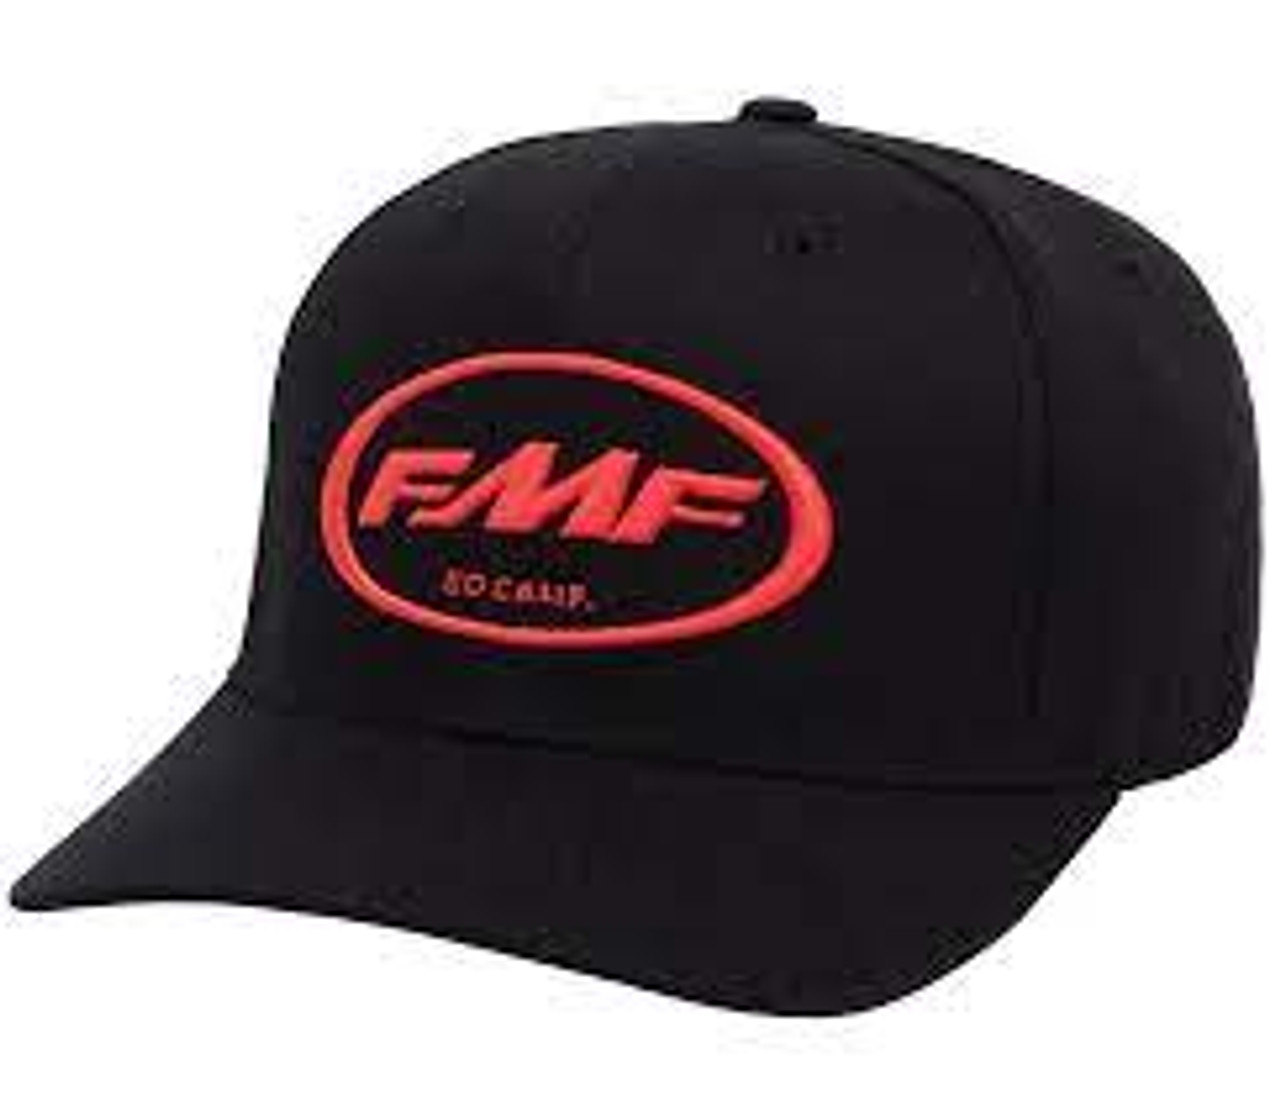 FMF Hat - Factory Classic Don - Black/Red - Surf and Dirt